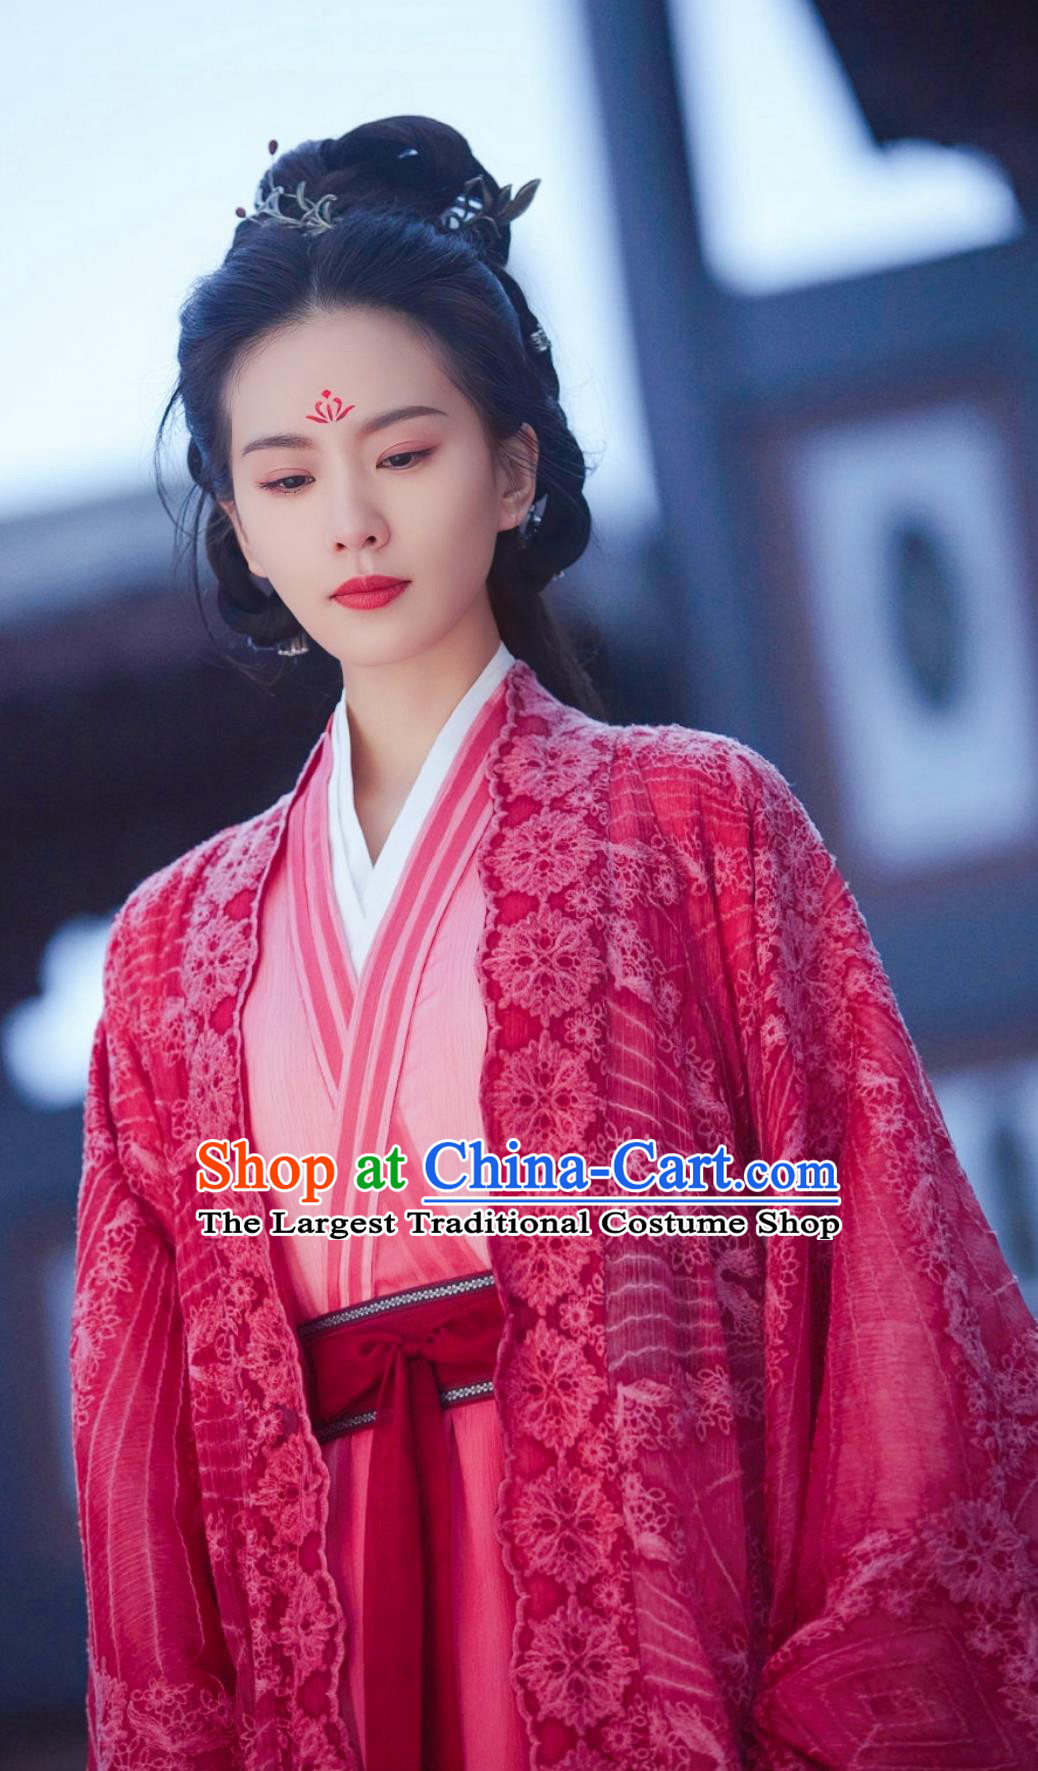 2023 TV Series A Journey To Love Ren Ru Yi Costume China Ancient Female Assassin Clothing Wuxia Drama Swordswoman Red Dress